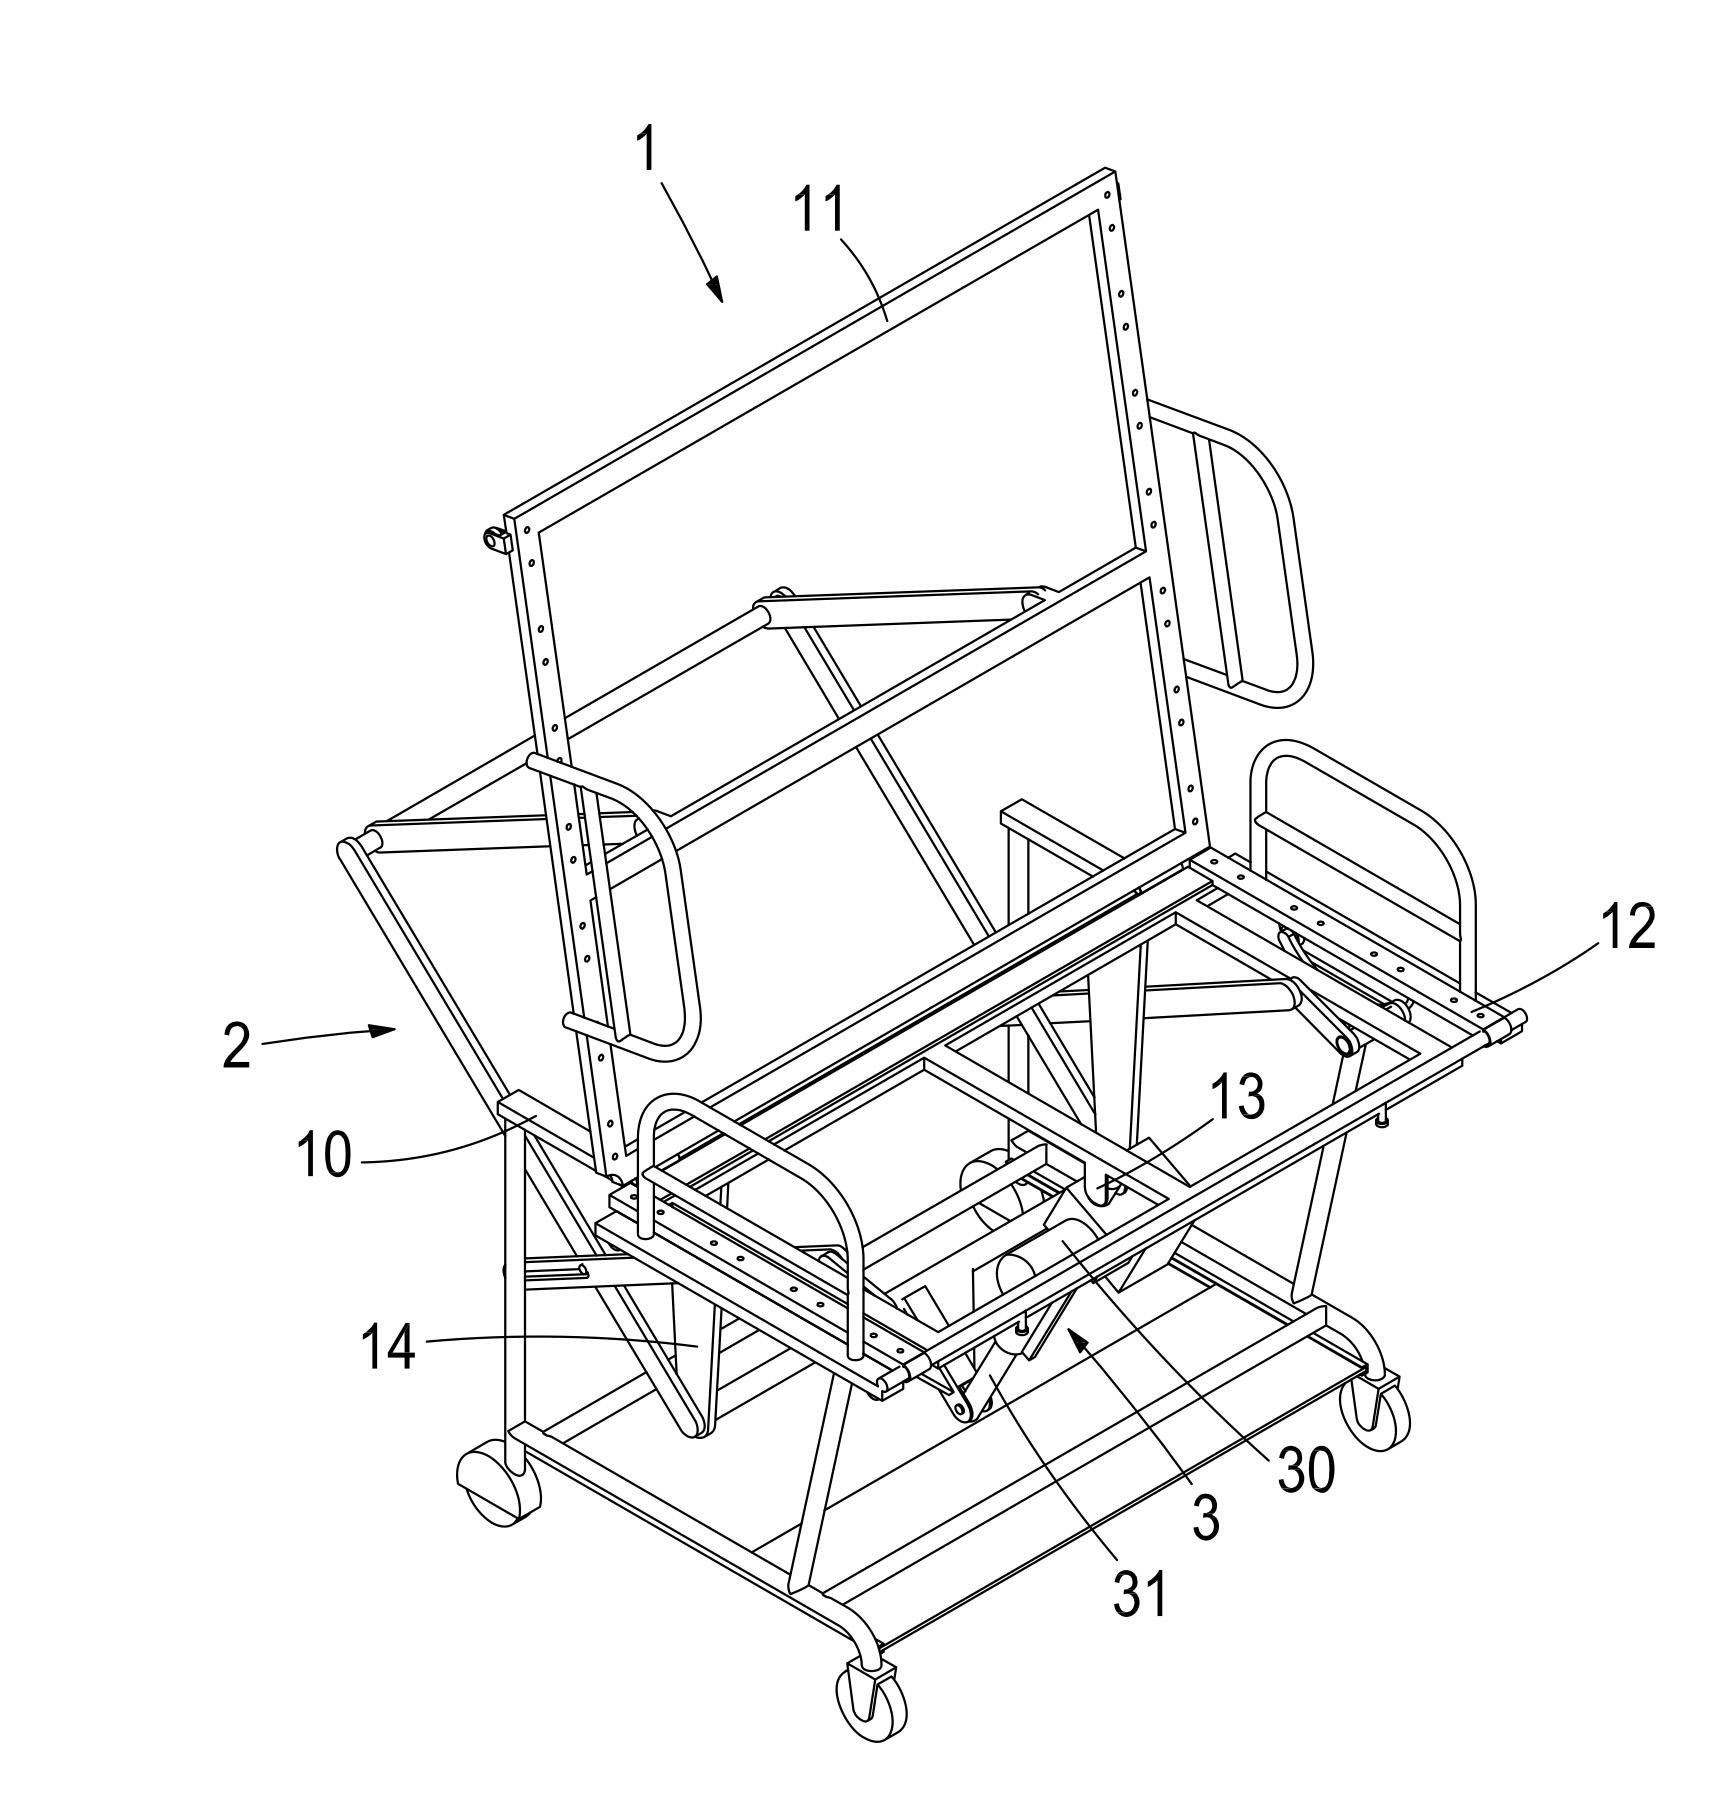 Device for helping person to stand and nursing bed for helping person to stand